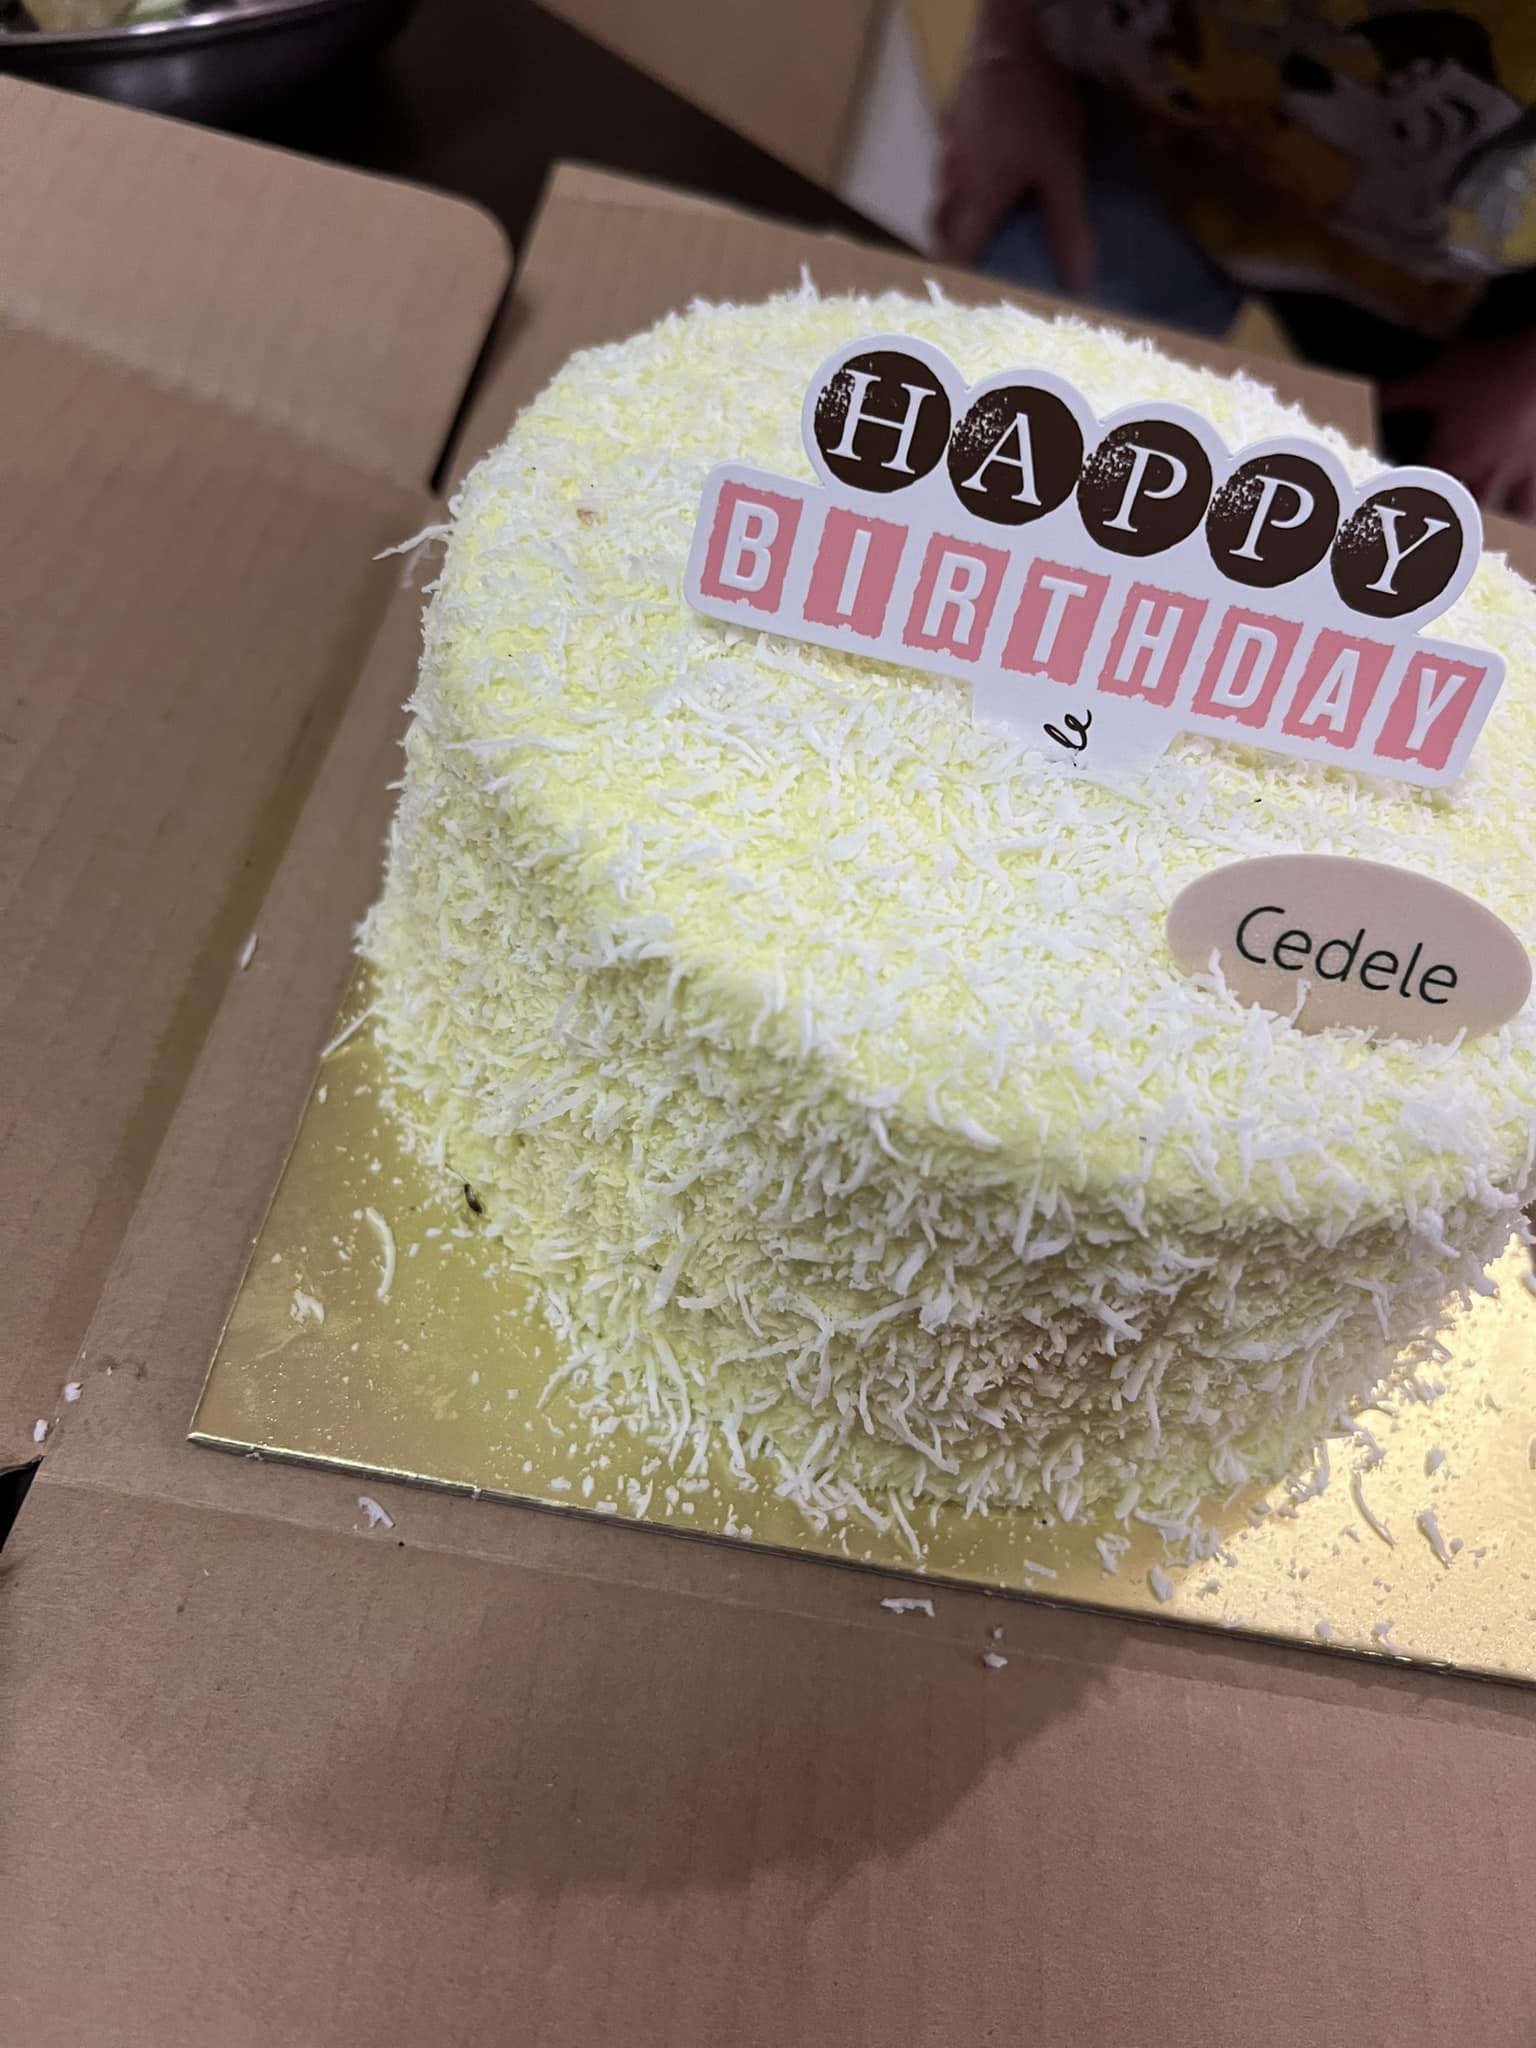 Customer finds live cockroach in Cedele cake from Waterway Point, bakery apologises